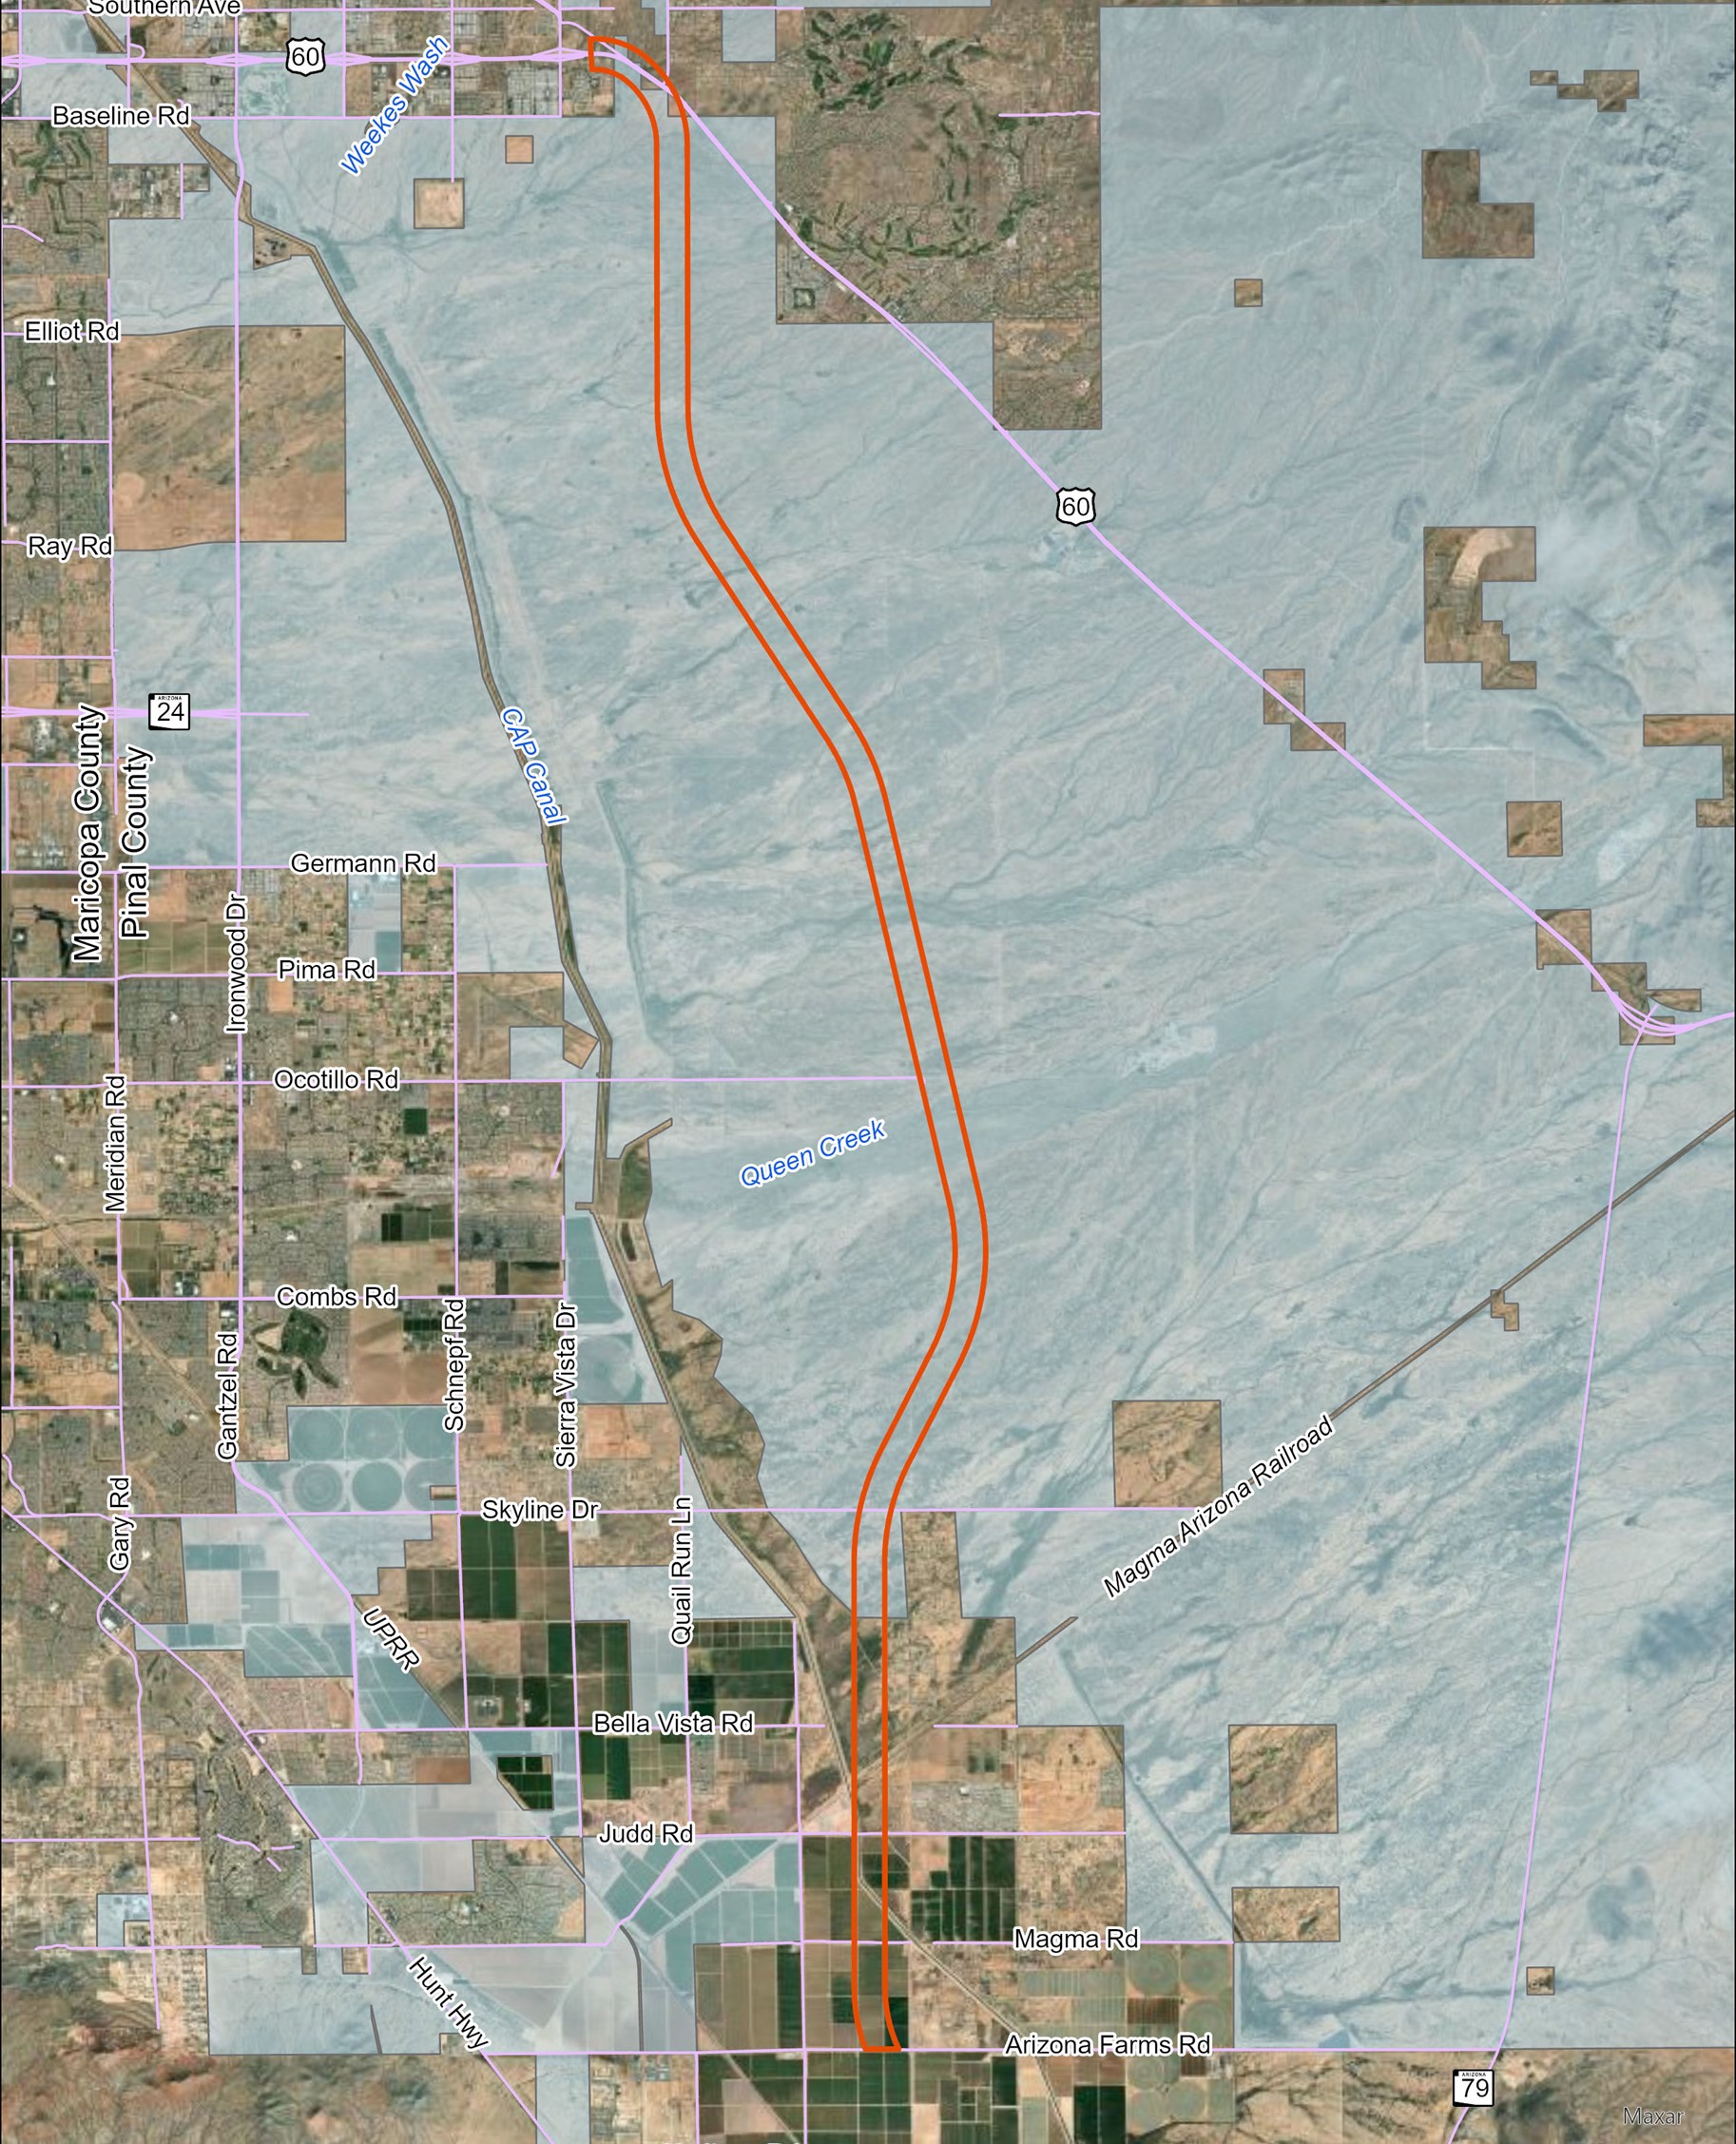 Alt text for this should say: Segment 1 map highlighting the land use within and around the study area which is primarily Arizona State Trust Land.